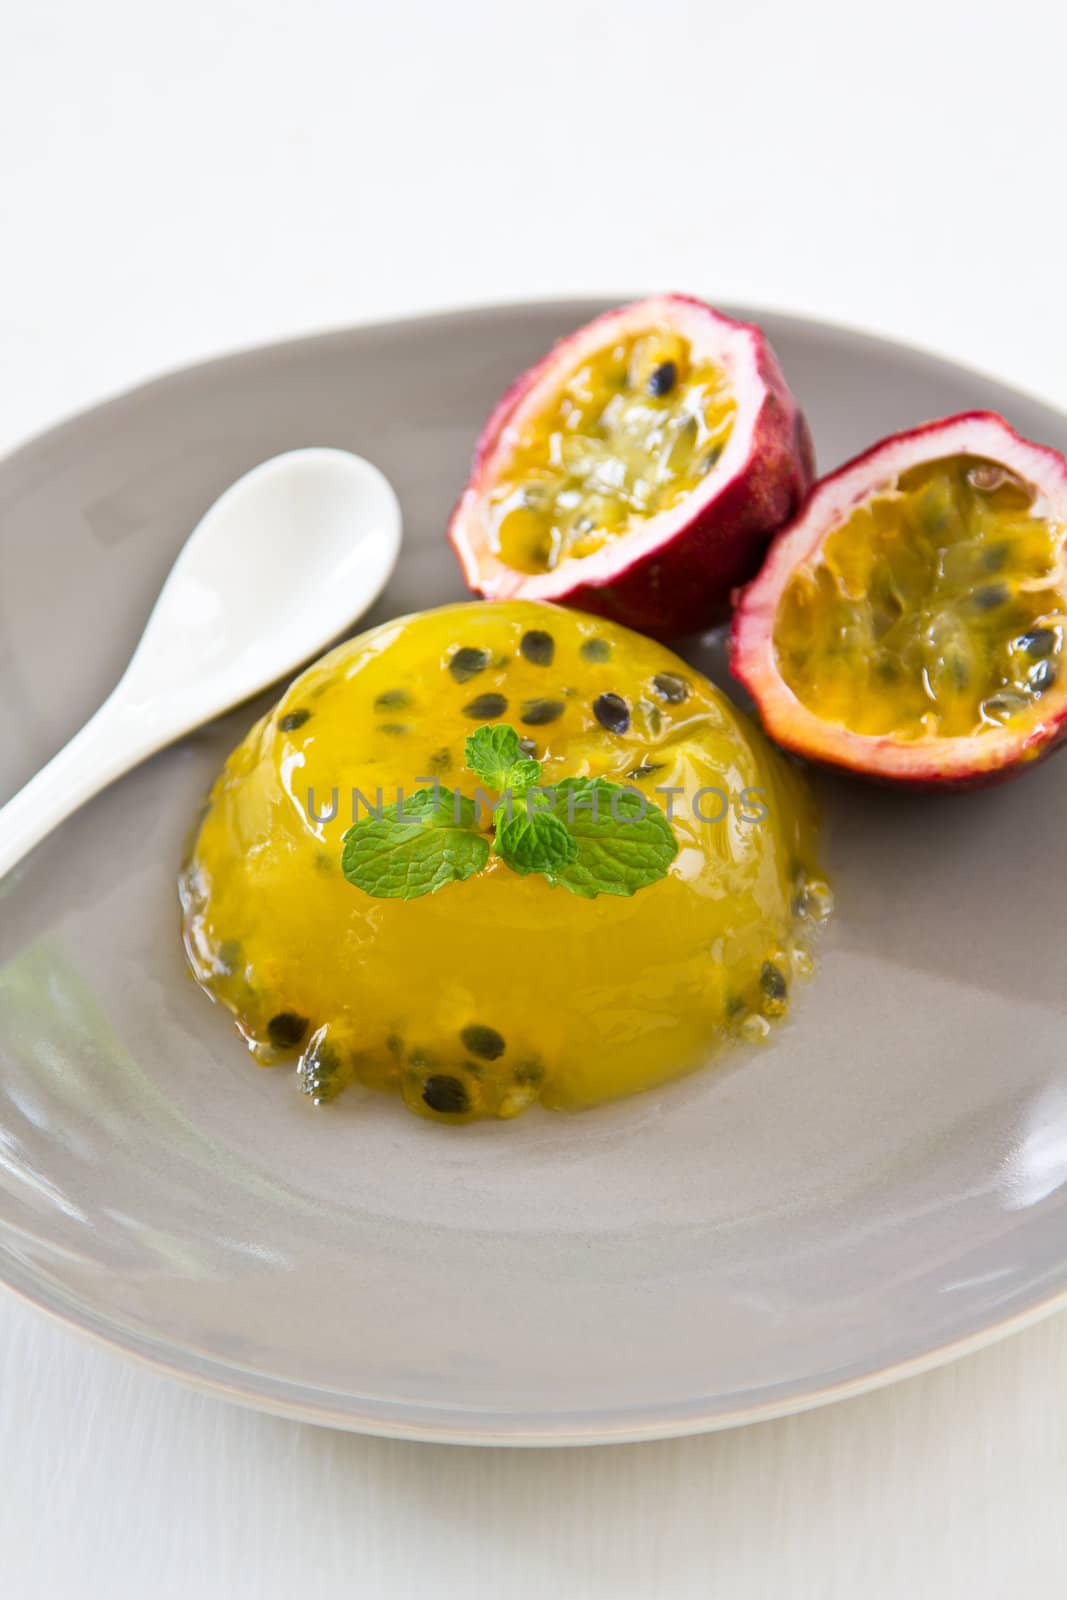 Passion fruit jelly by fresh passion fruit